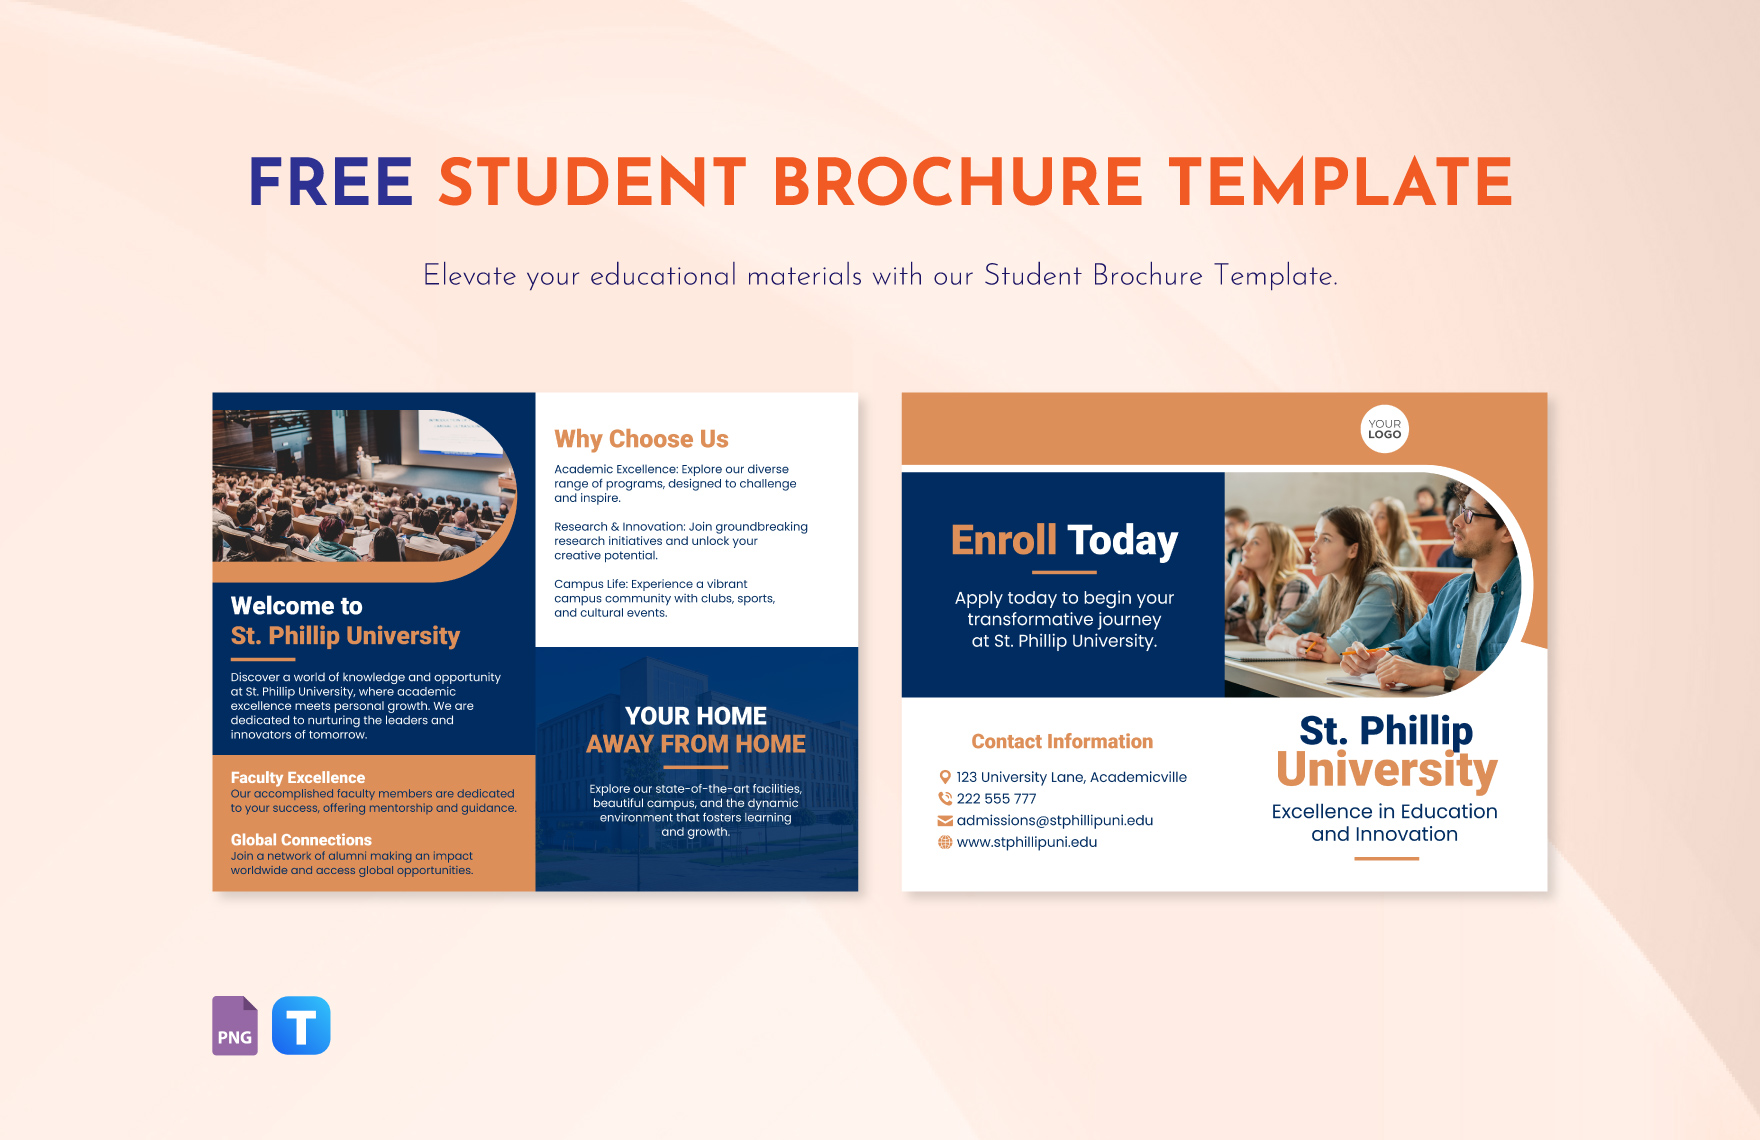 Free Student Brochure Template